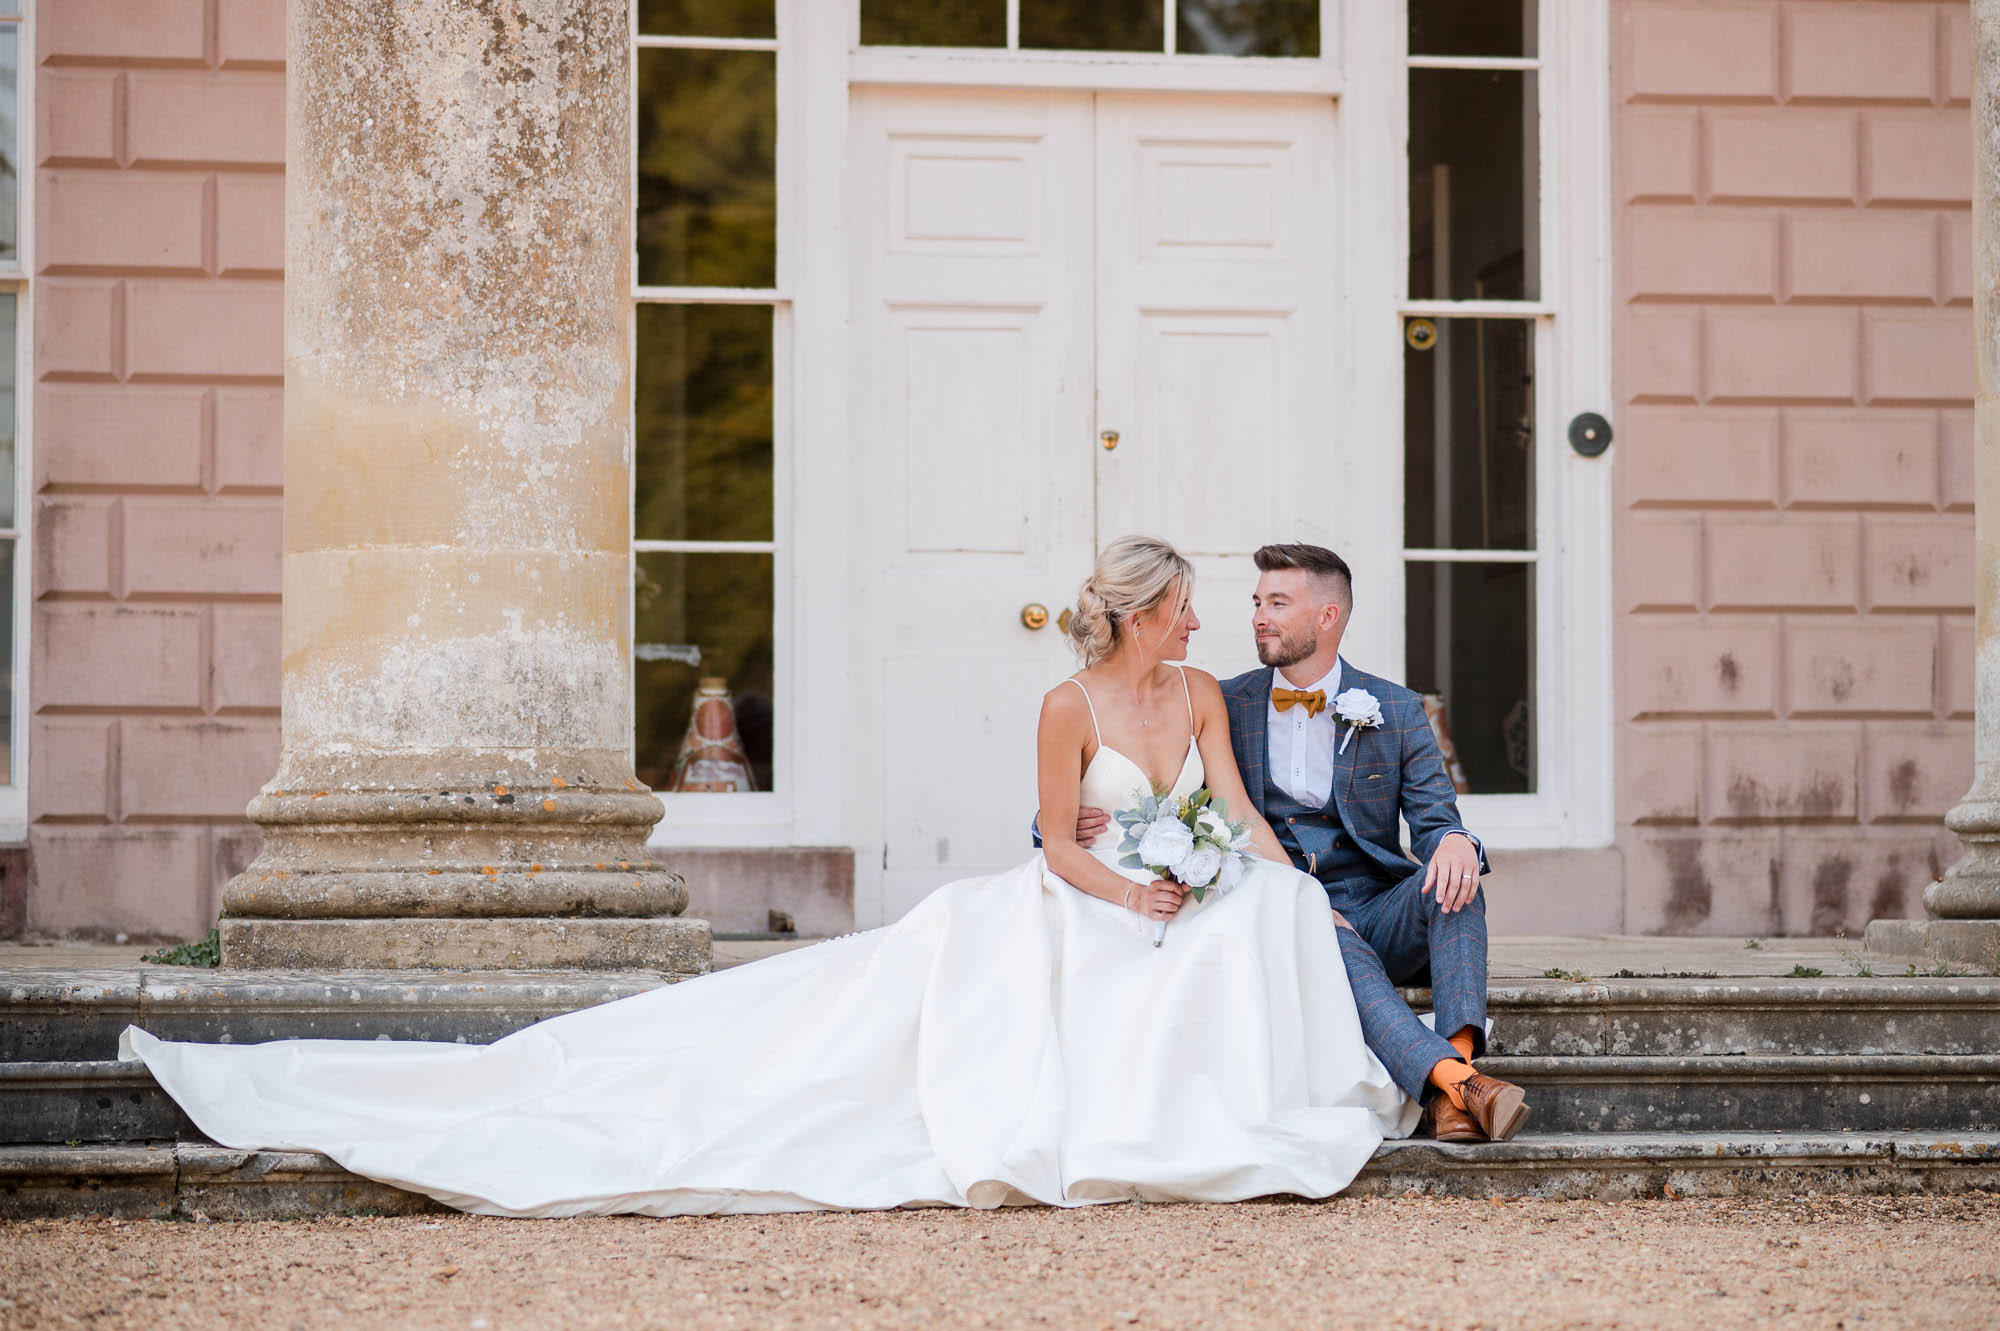 Bride and groom sat on the steps of Hale Park wedding venue. She's wearing a dress with a full train and holding flowers. He's in a tan bowtie with orange socks. By Libra Photographic, Dorset